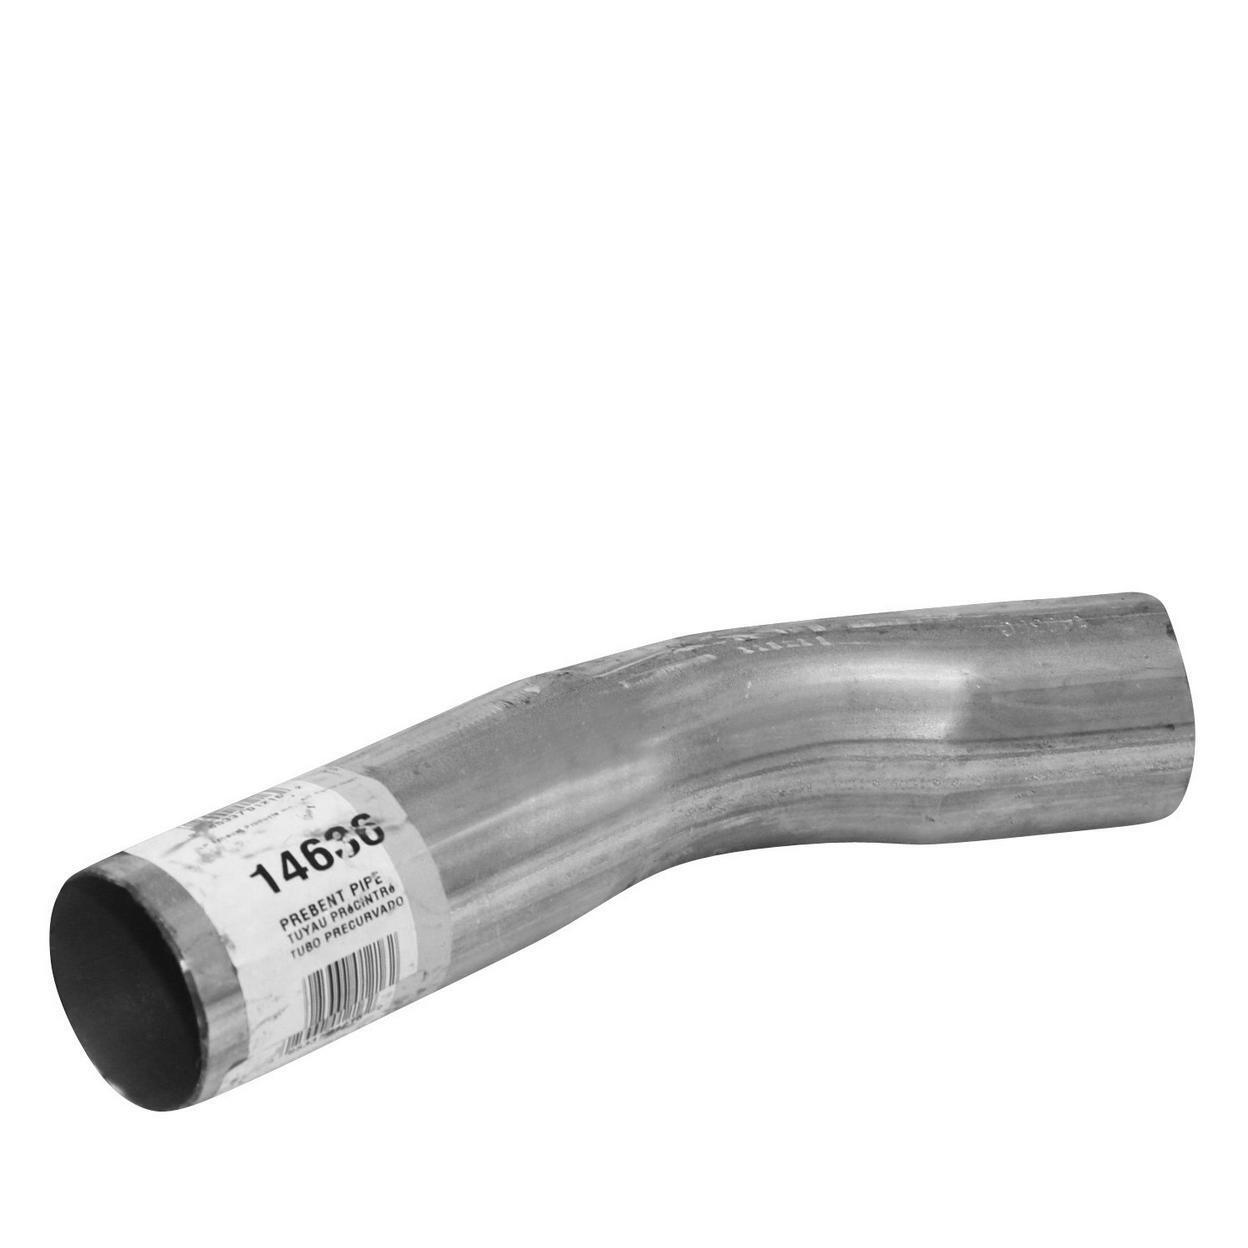 14636-AR Exhaust Tail Pipe Fits 1985-1987 Oldsmobile Calais 2.5L L4 GAS OHV